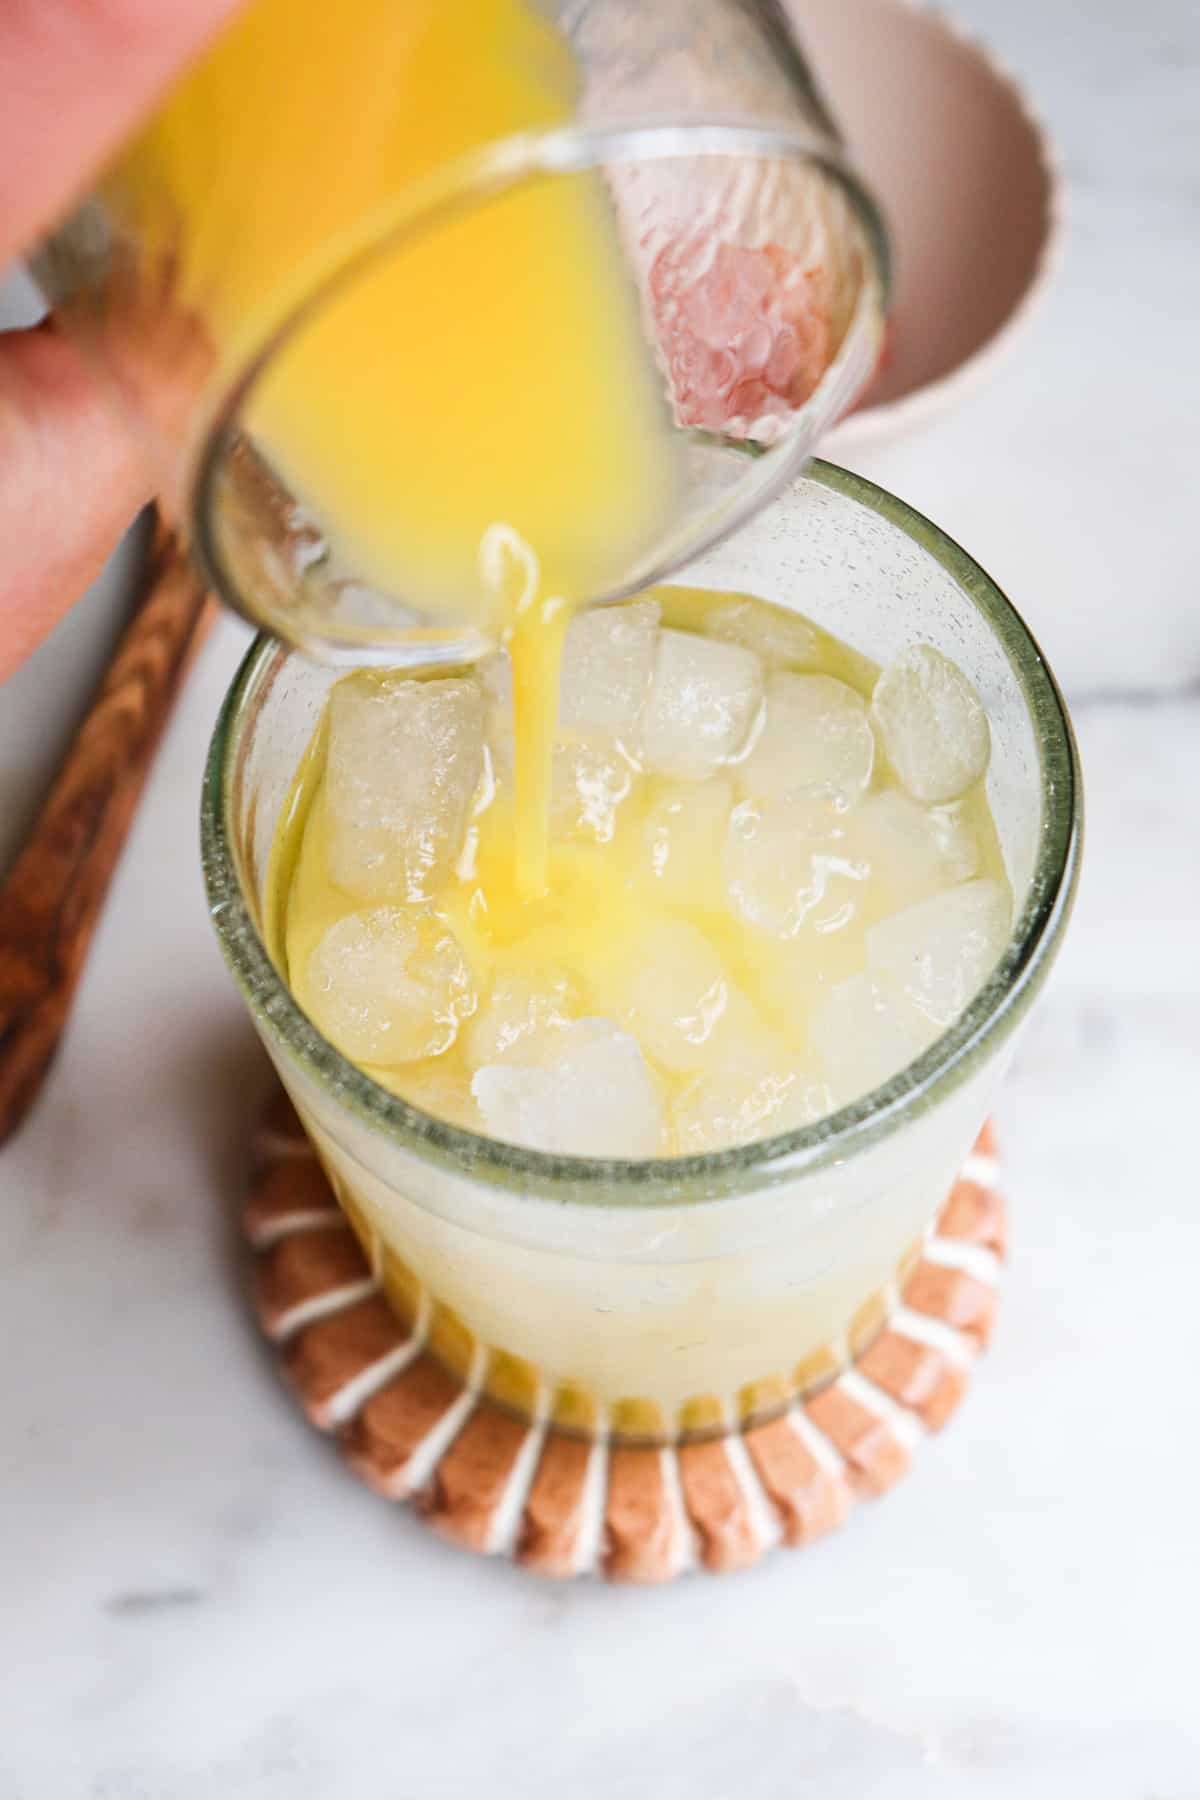 orange juice pouring into glass of coconut water.